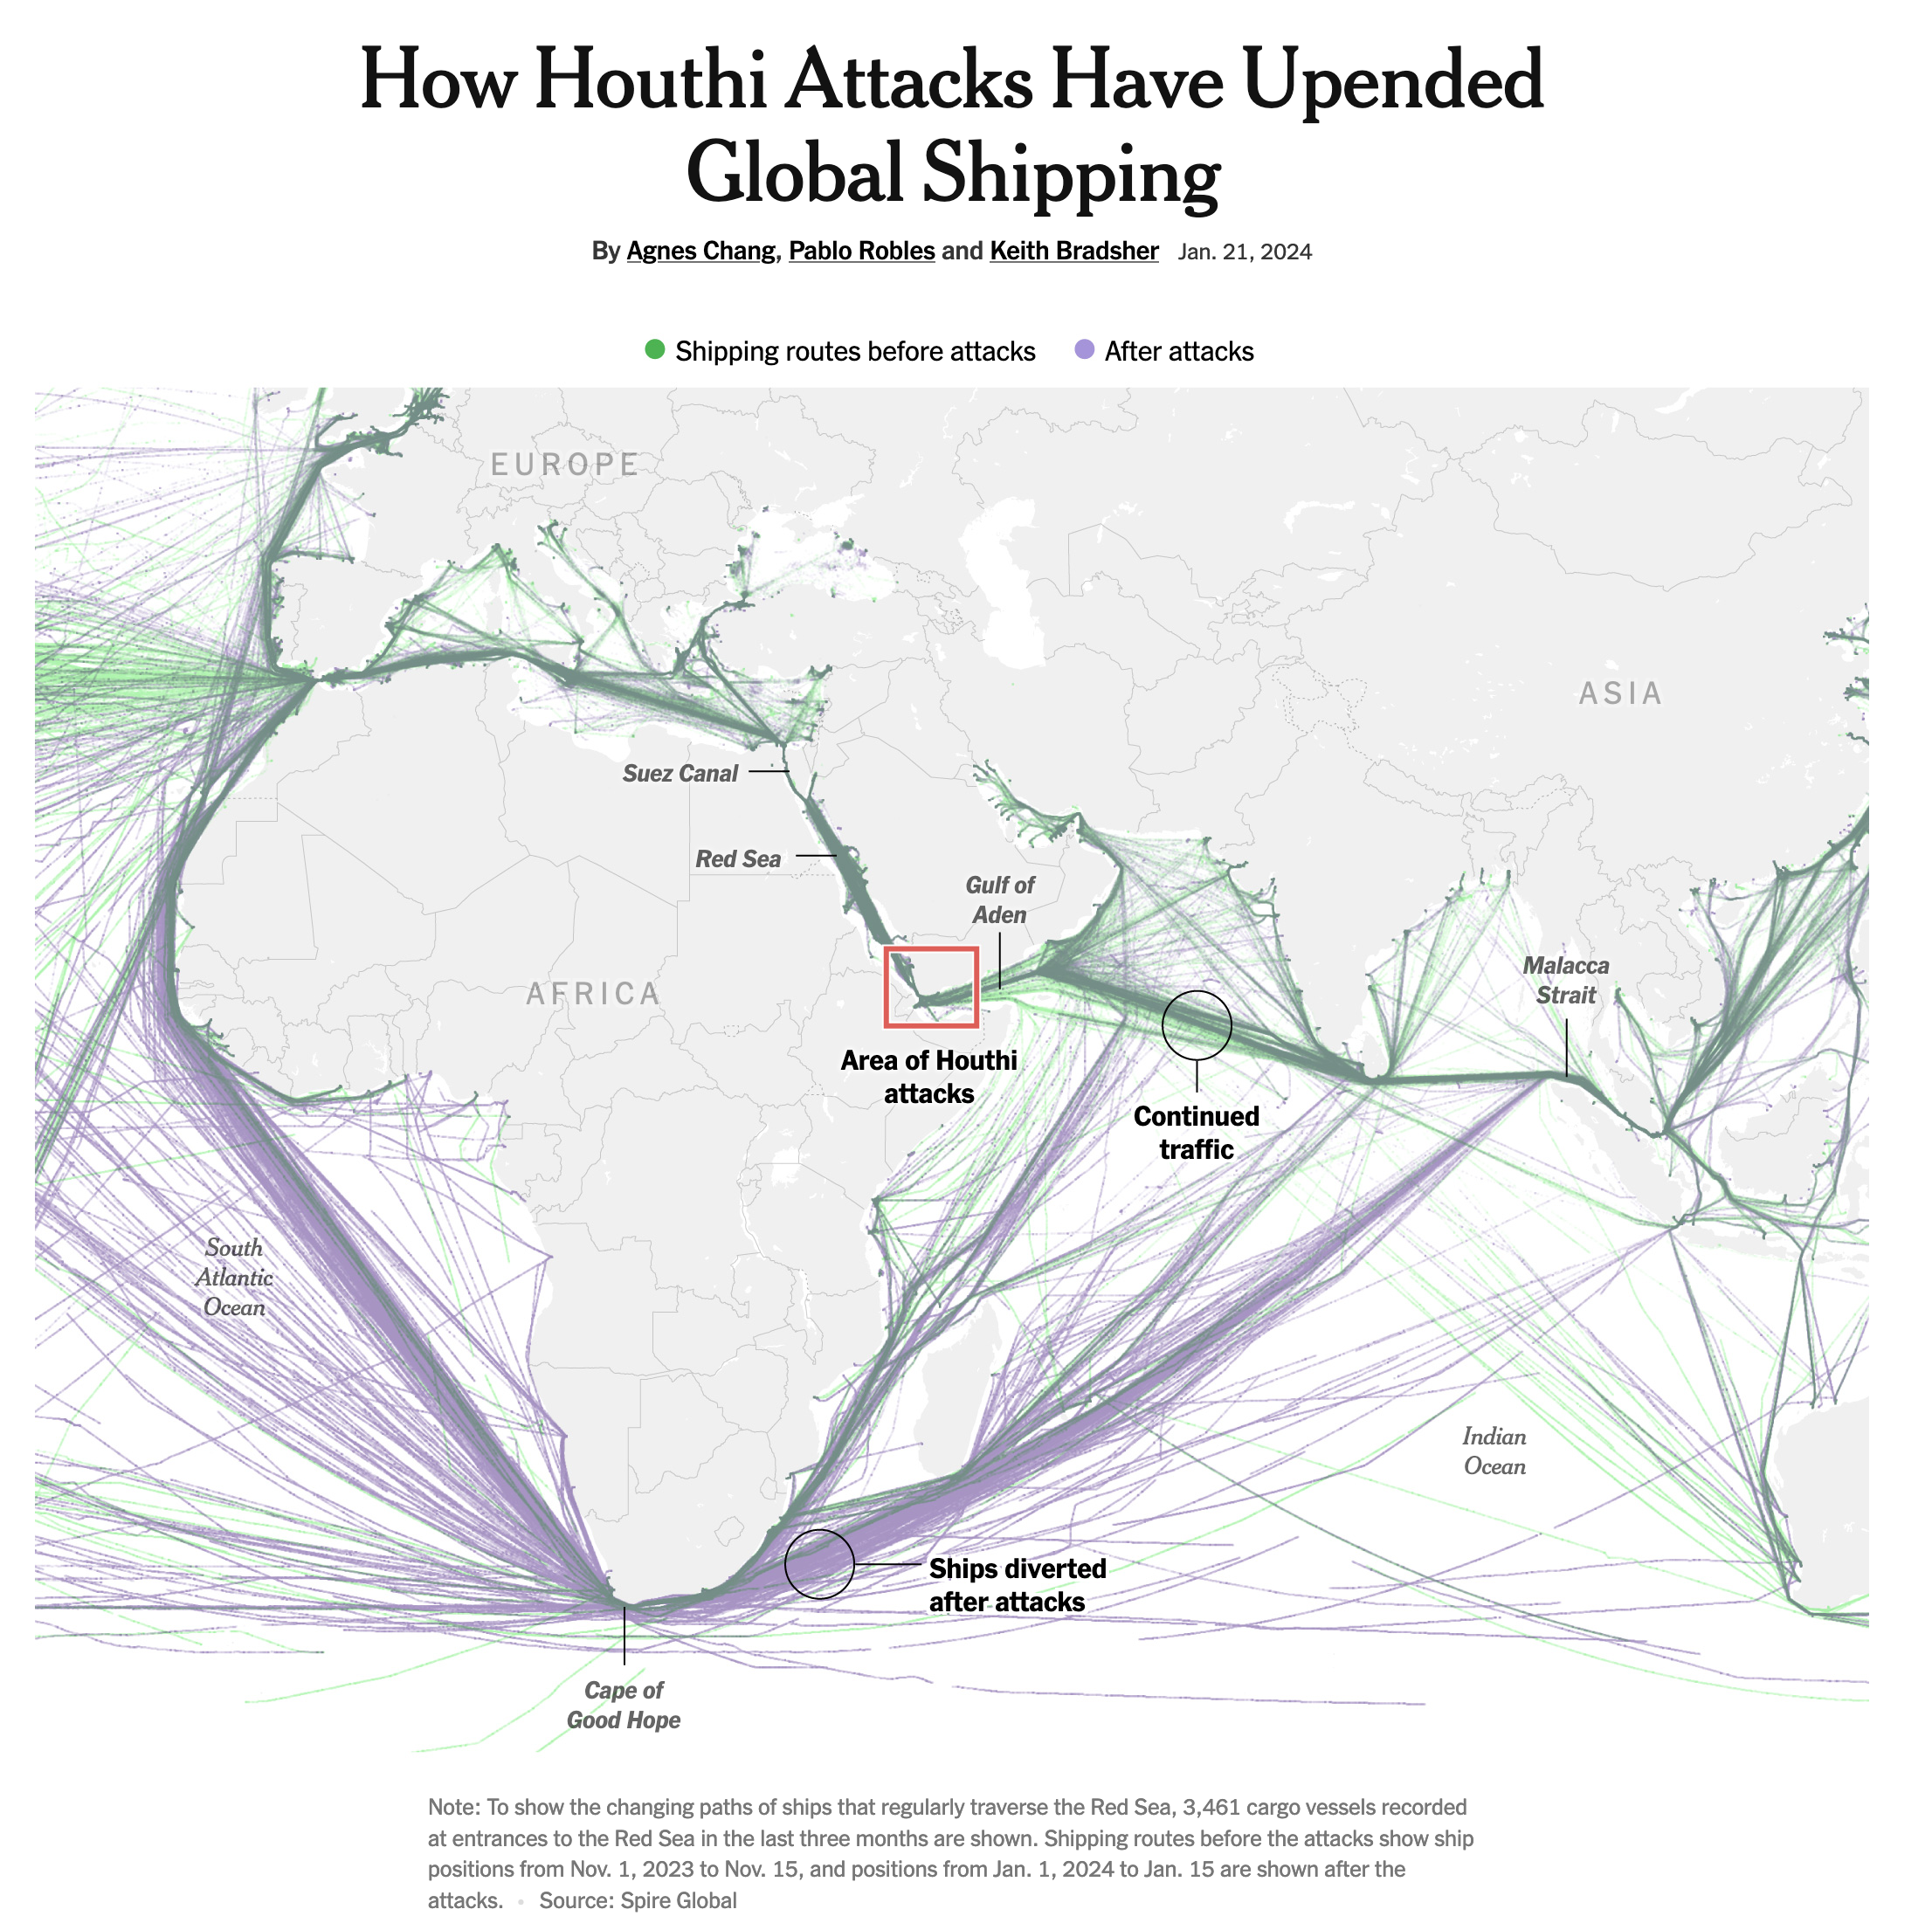 Maritime trade has shifted around Africa since the Houthi attacks (map of maritime trade, before / after the attacks).